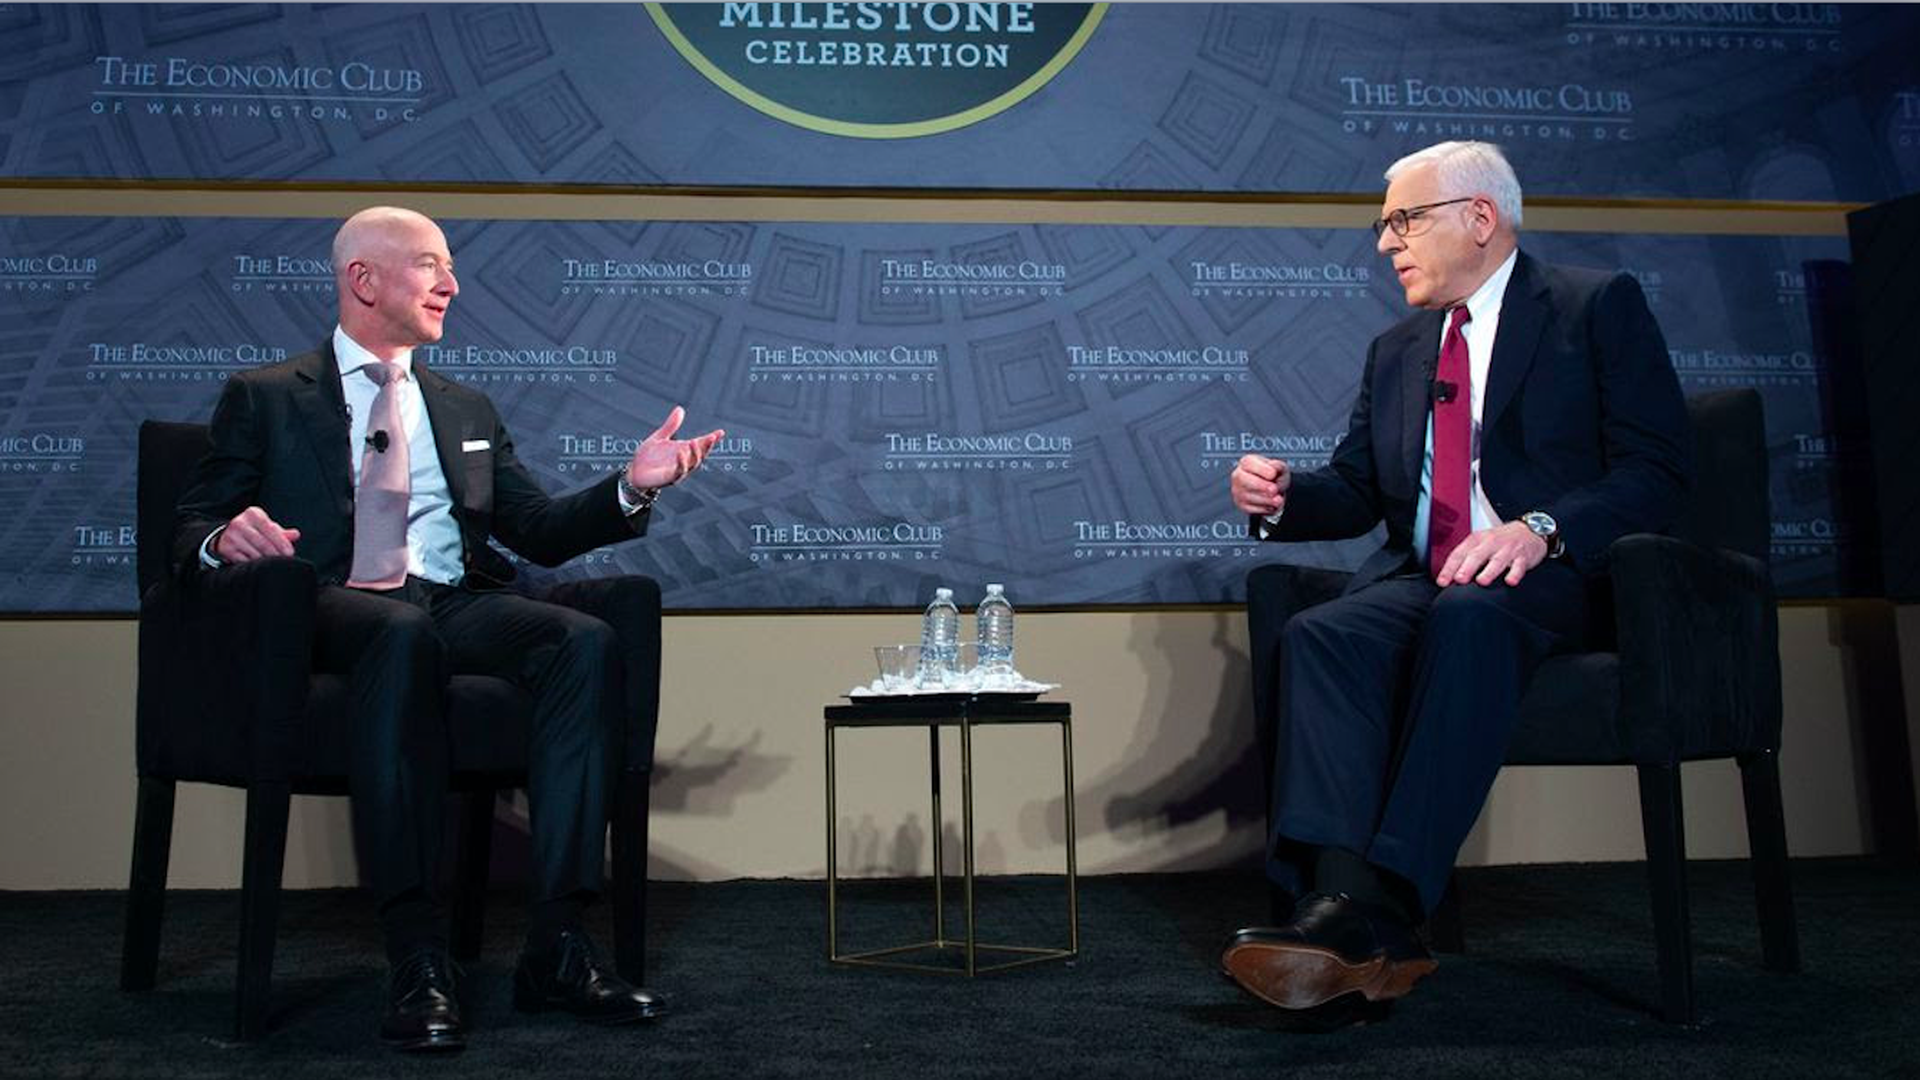 Bezos motions with his arms while talking to Rubenstein onstage